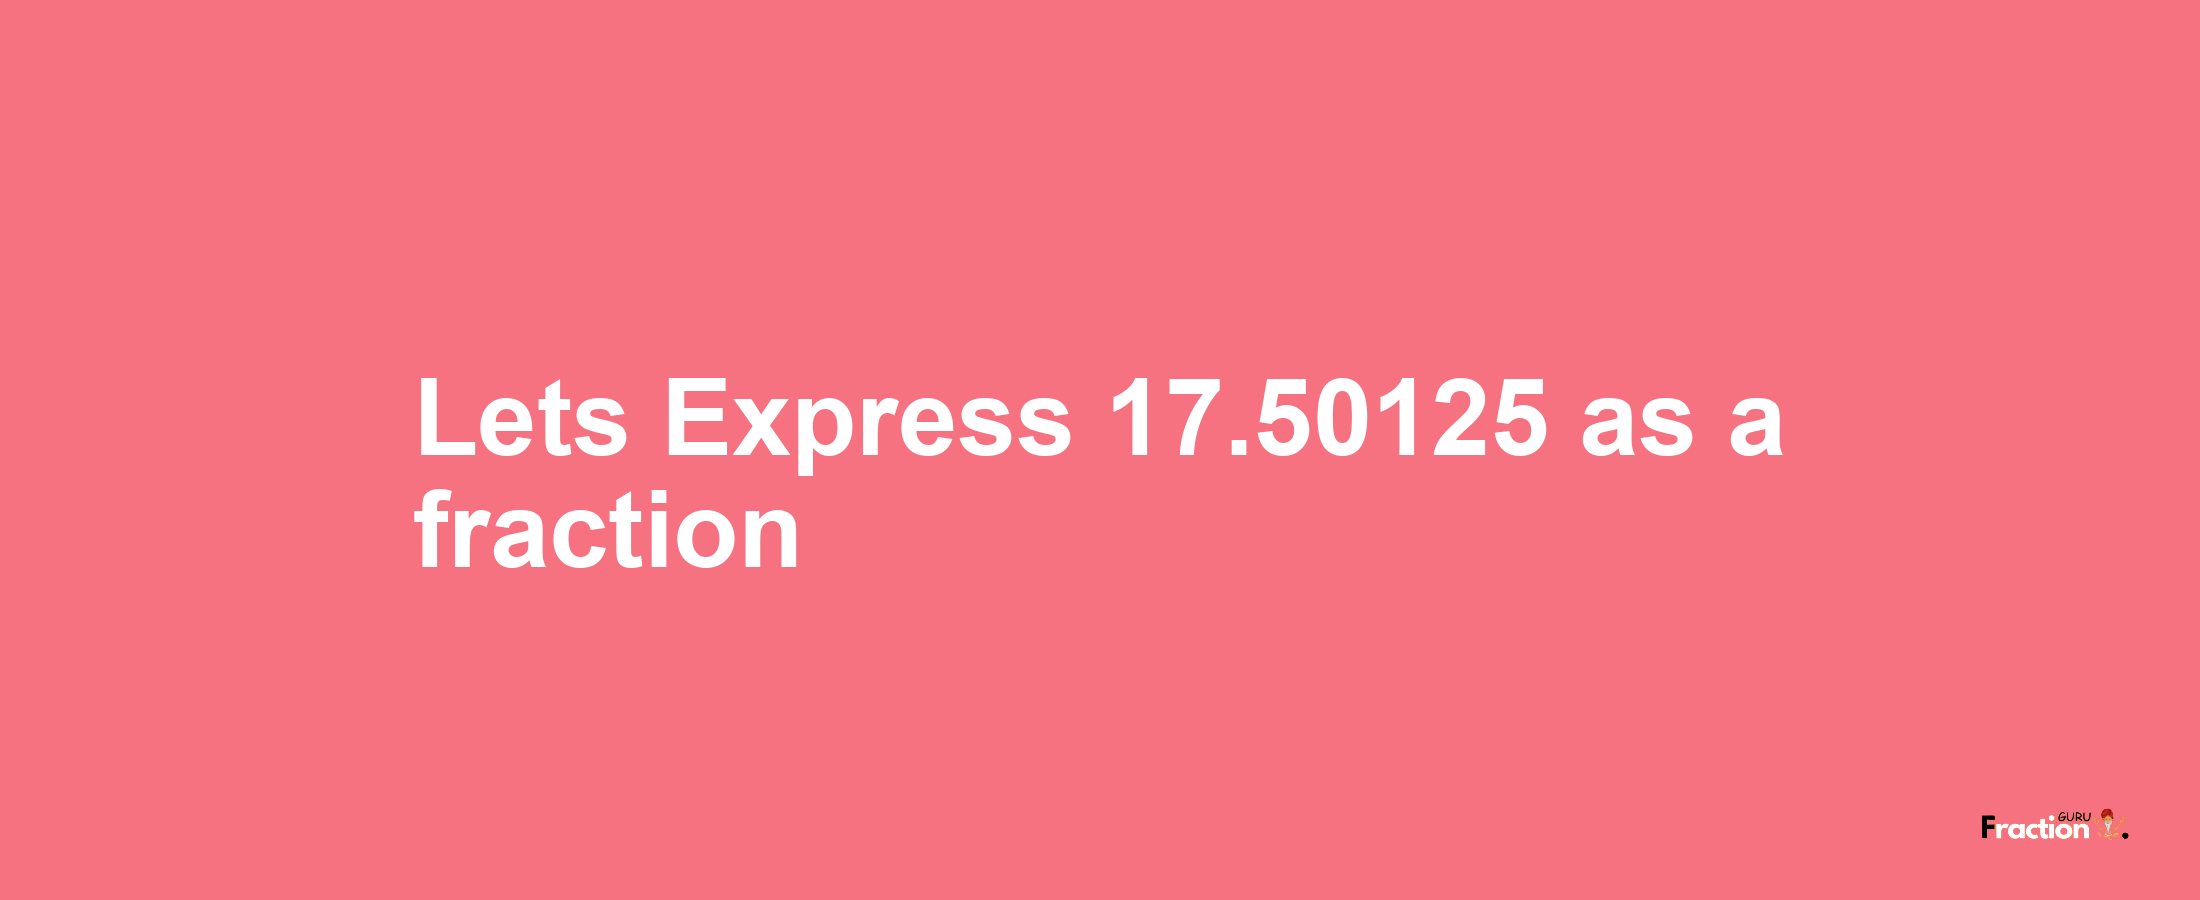 Lets Express 17.50125 as afraction